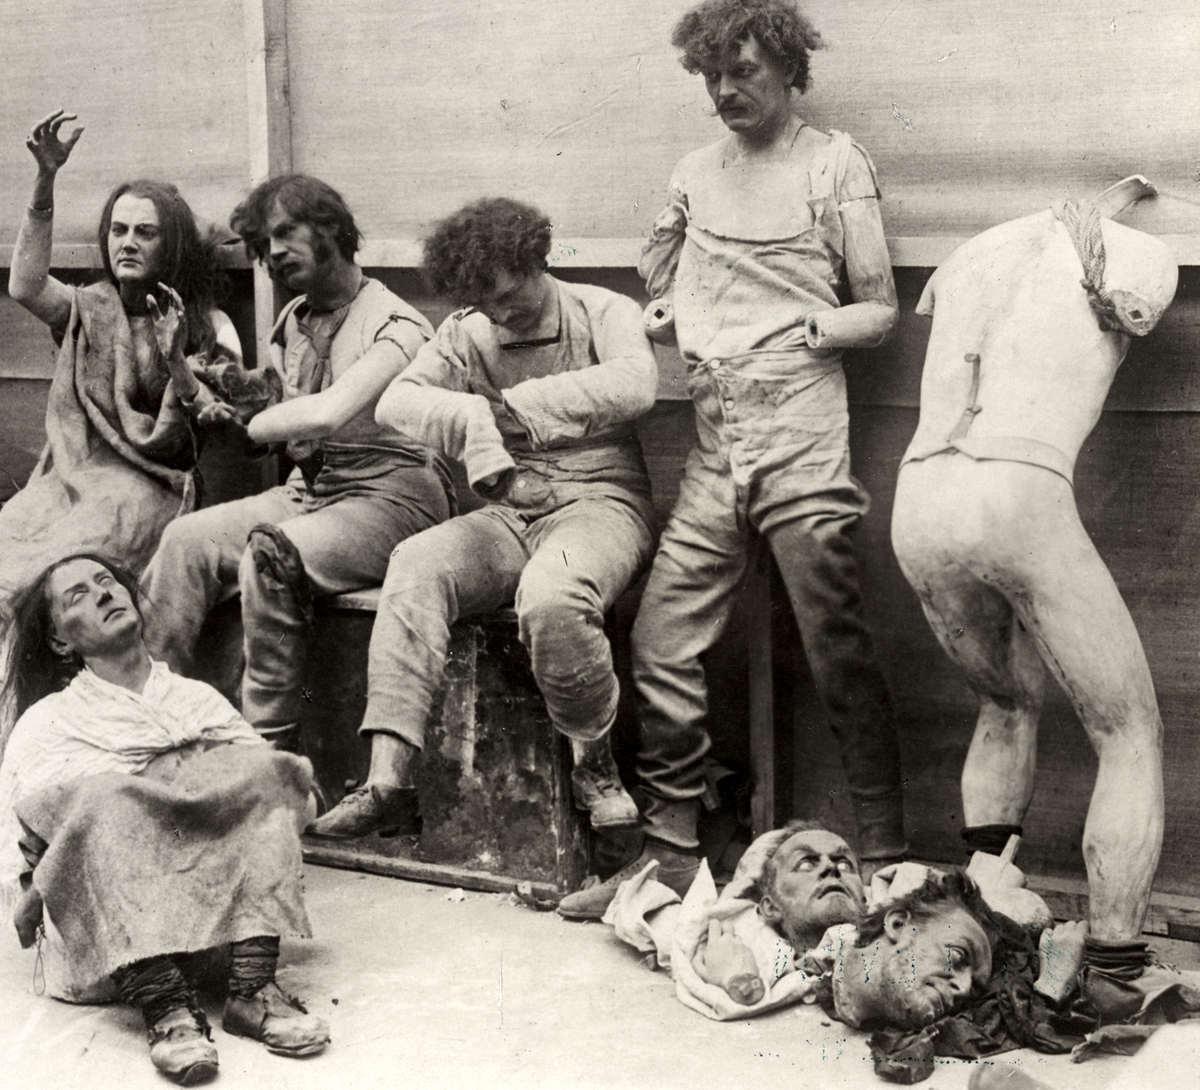 Melted wax figures rescued from the 1925 fire at Madam Tussaud's London museum.jpg